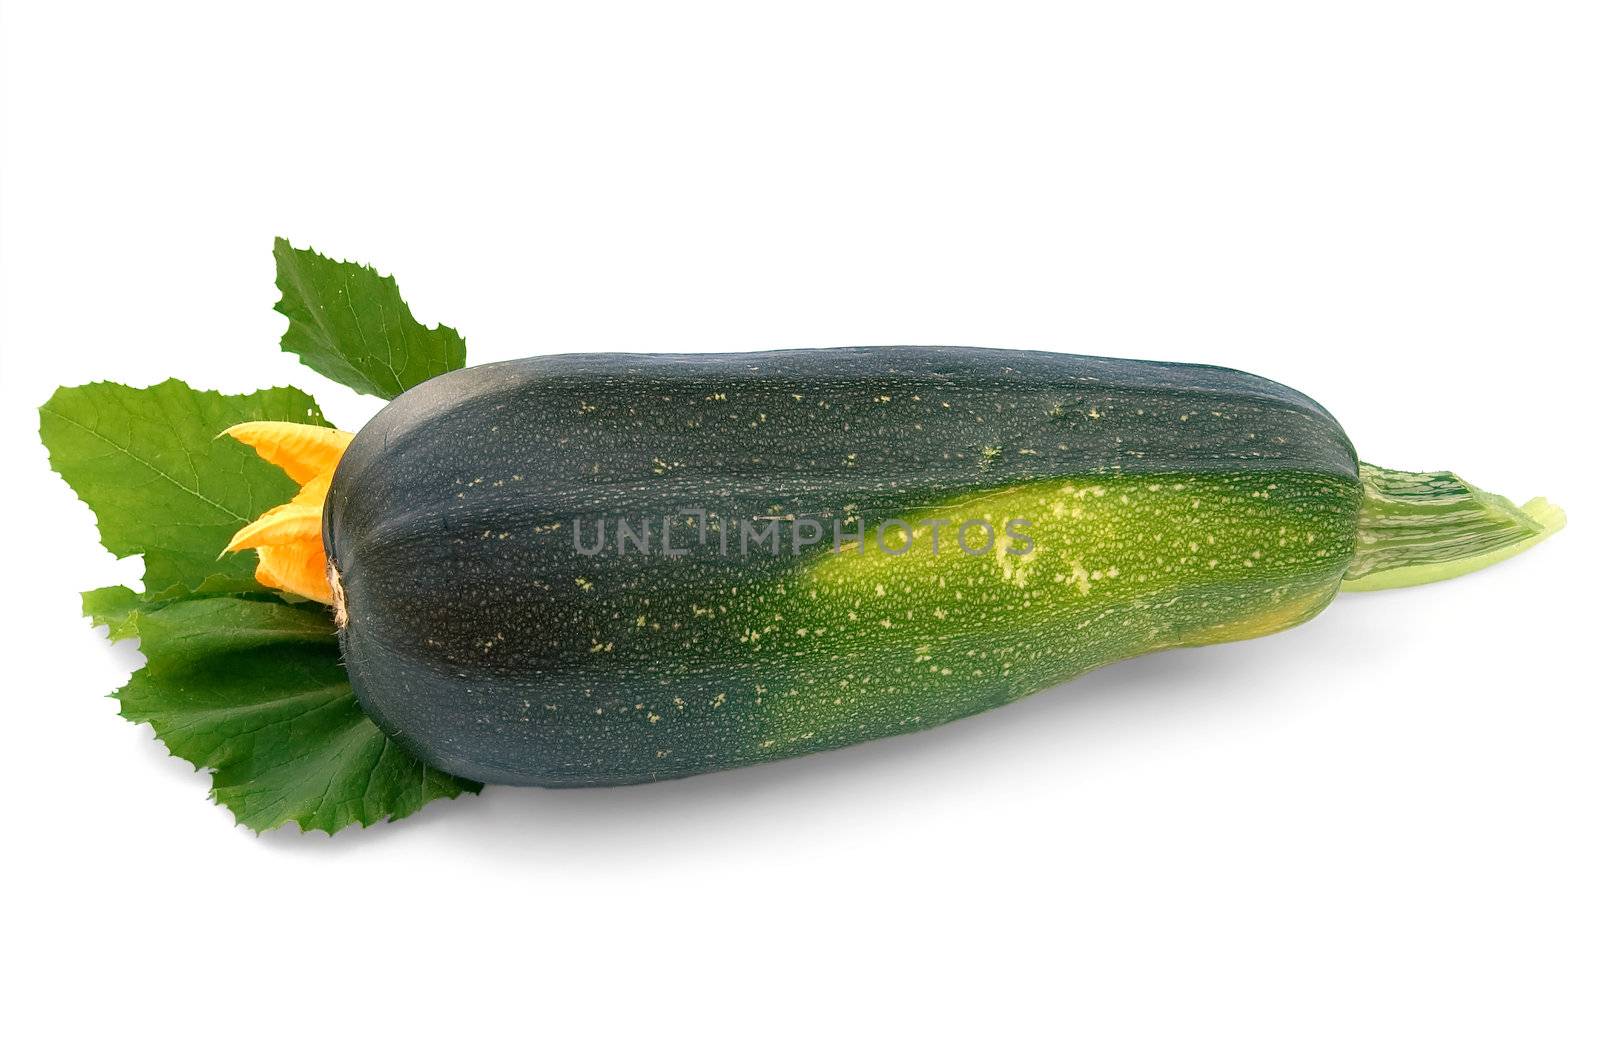 Green squash with yellow spots, green leaf and yellow flower isolated on white background